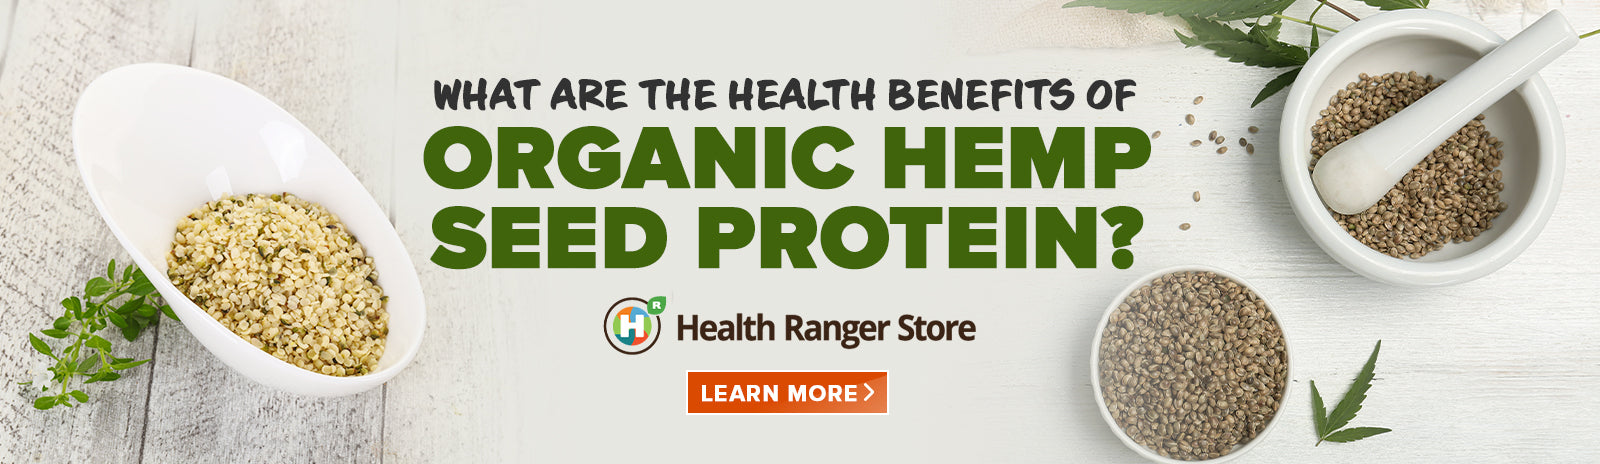 Organic Hemp is the best plant-based protein - here's why